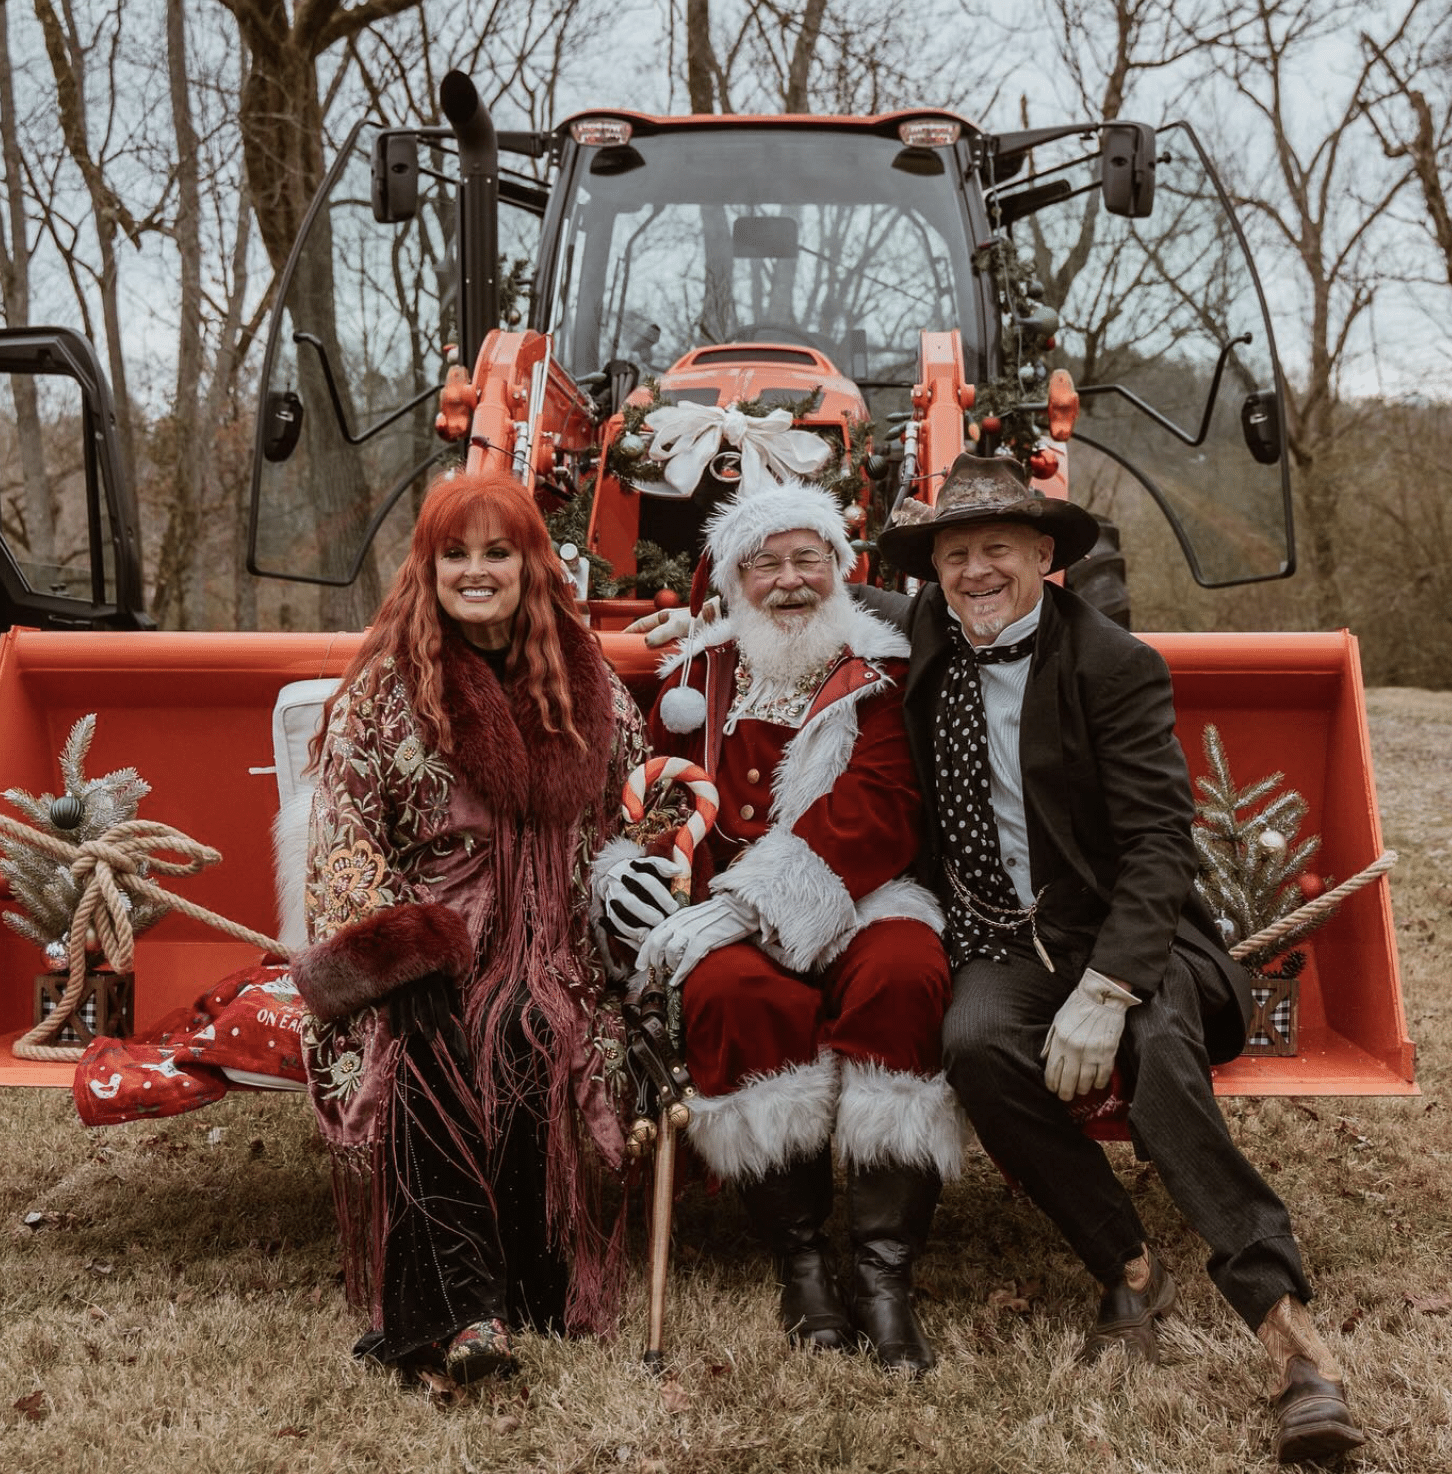 Wynonna Judd and her husband Cactus Moser as the Grand Marshals for the annual Leiper’s Fork Christmas Parade.